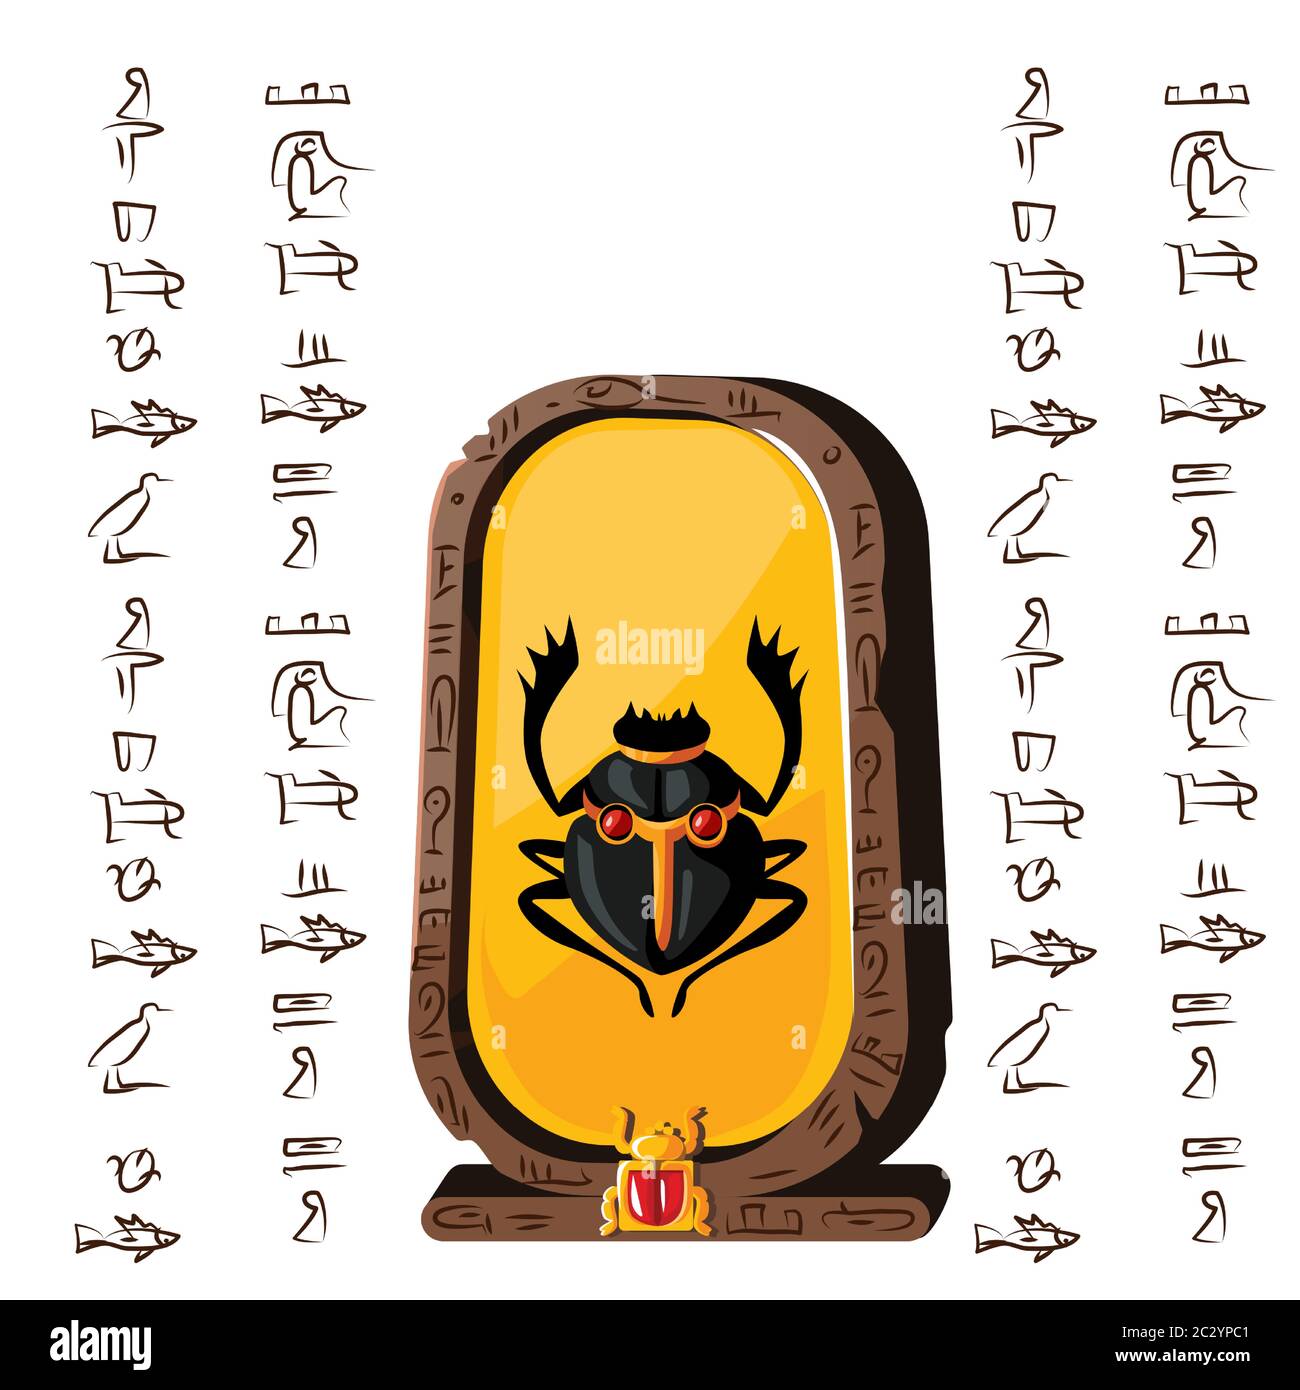 Stone board or clay tablet with scarab beetle and Egyptian hieroglyphs cartoon vector illustration Ancient object for recording storing information, g Stock Vector